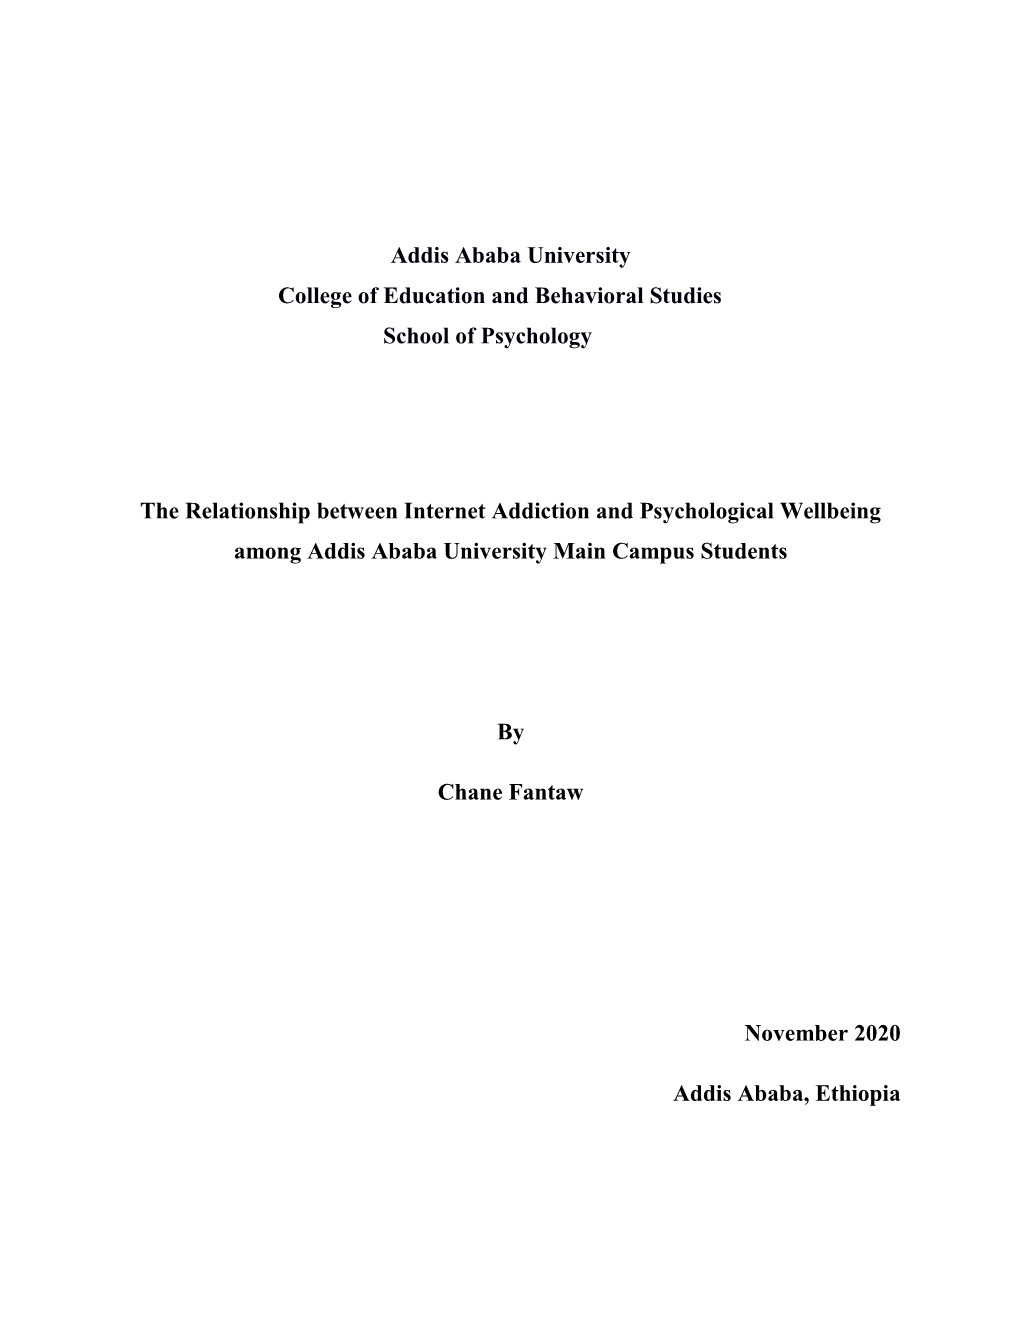 Addis Ababa University College of Education and Behavioral Studies School of Psychology